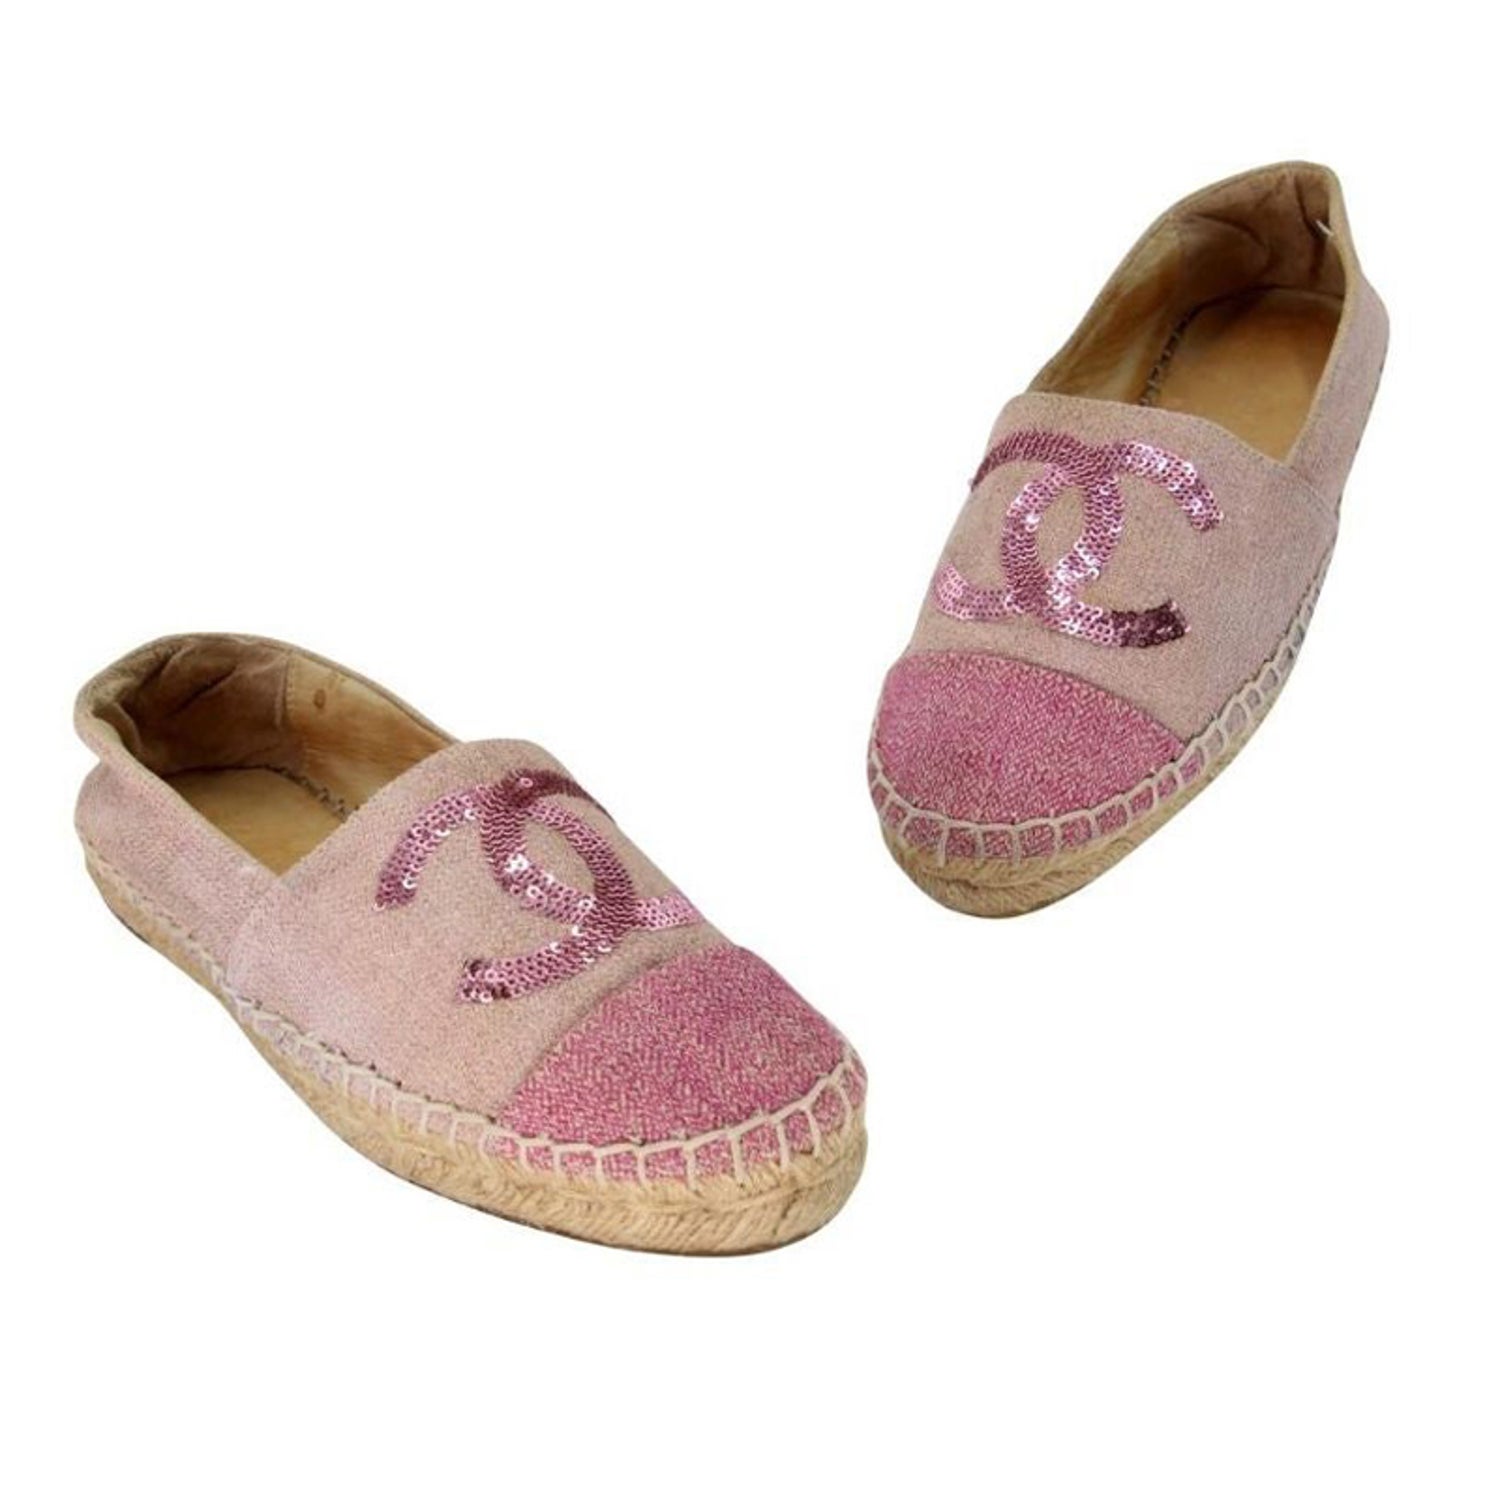 Leather espadrilles Chanel Pink size 41 EU in Leather - 35521421